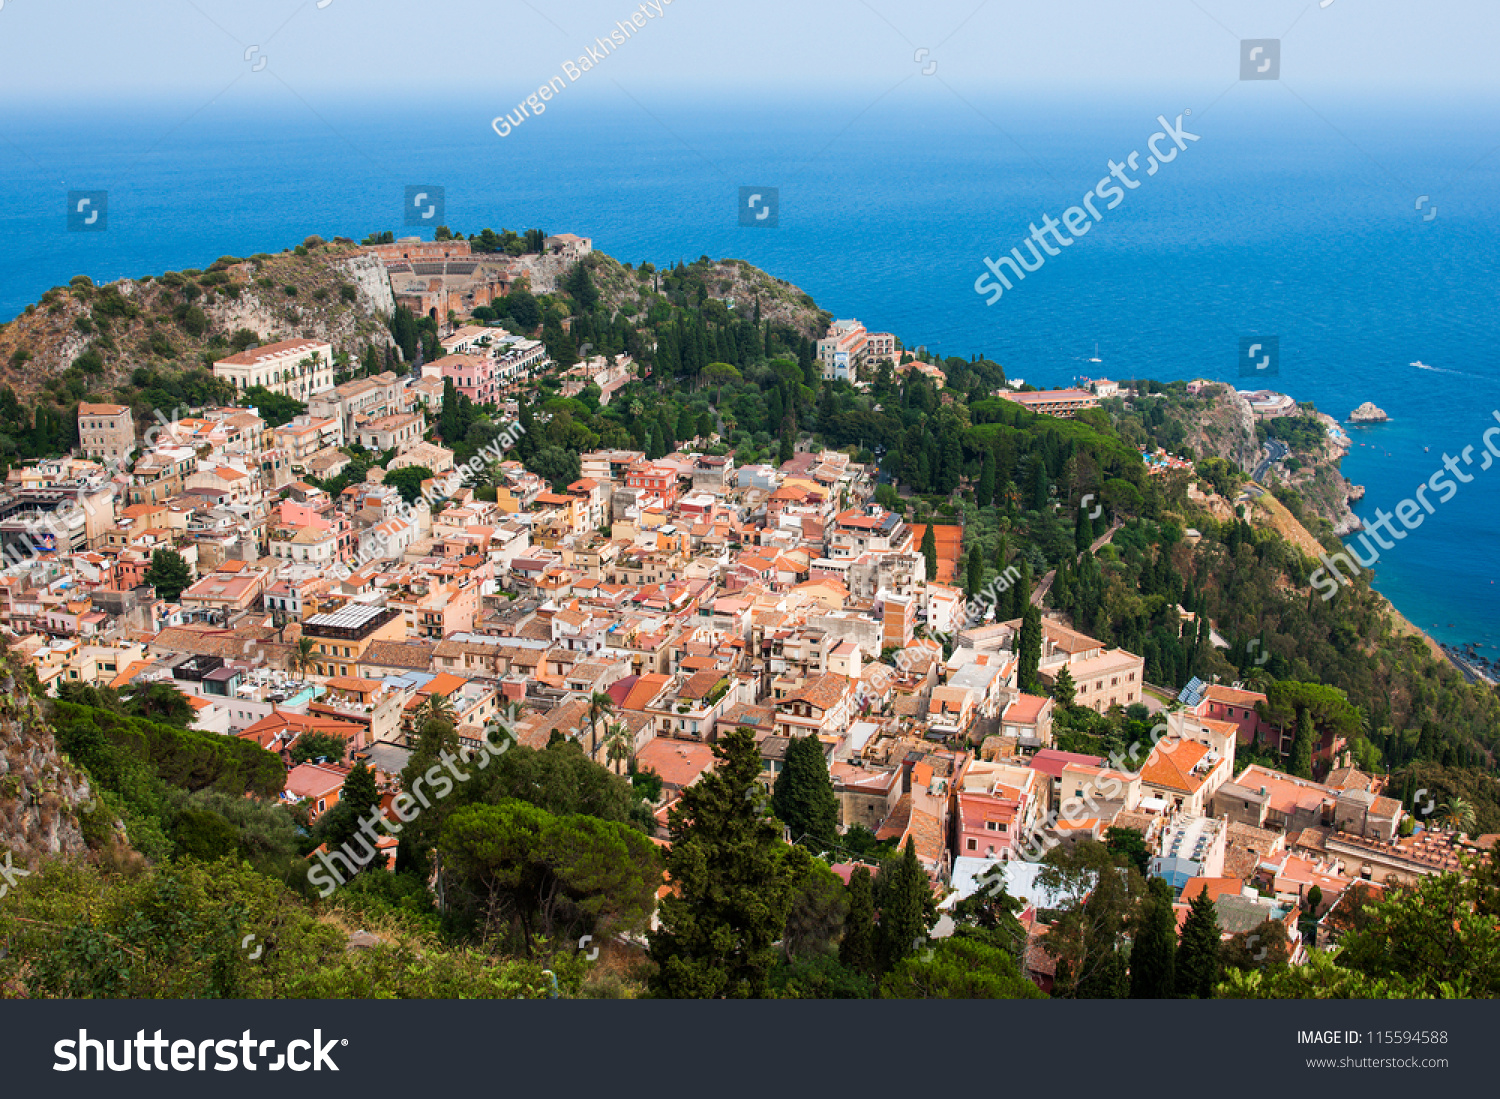 Aerial View Of The Taormina City, With The Ancient Greek Amphitheater ...